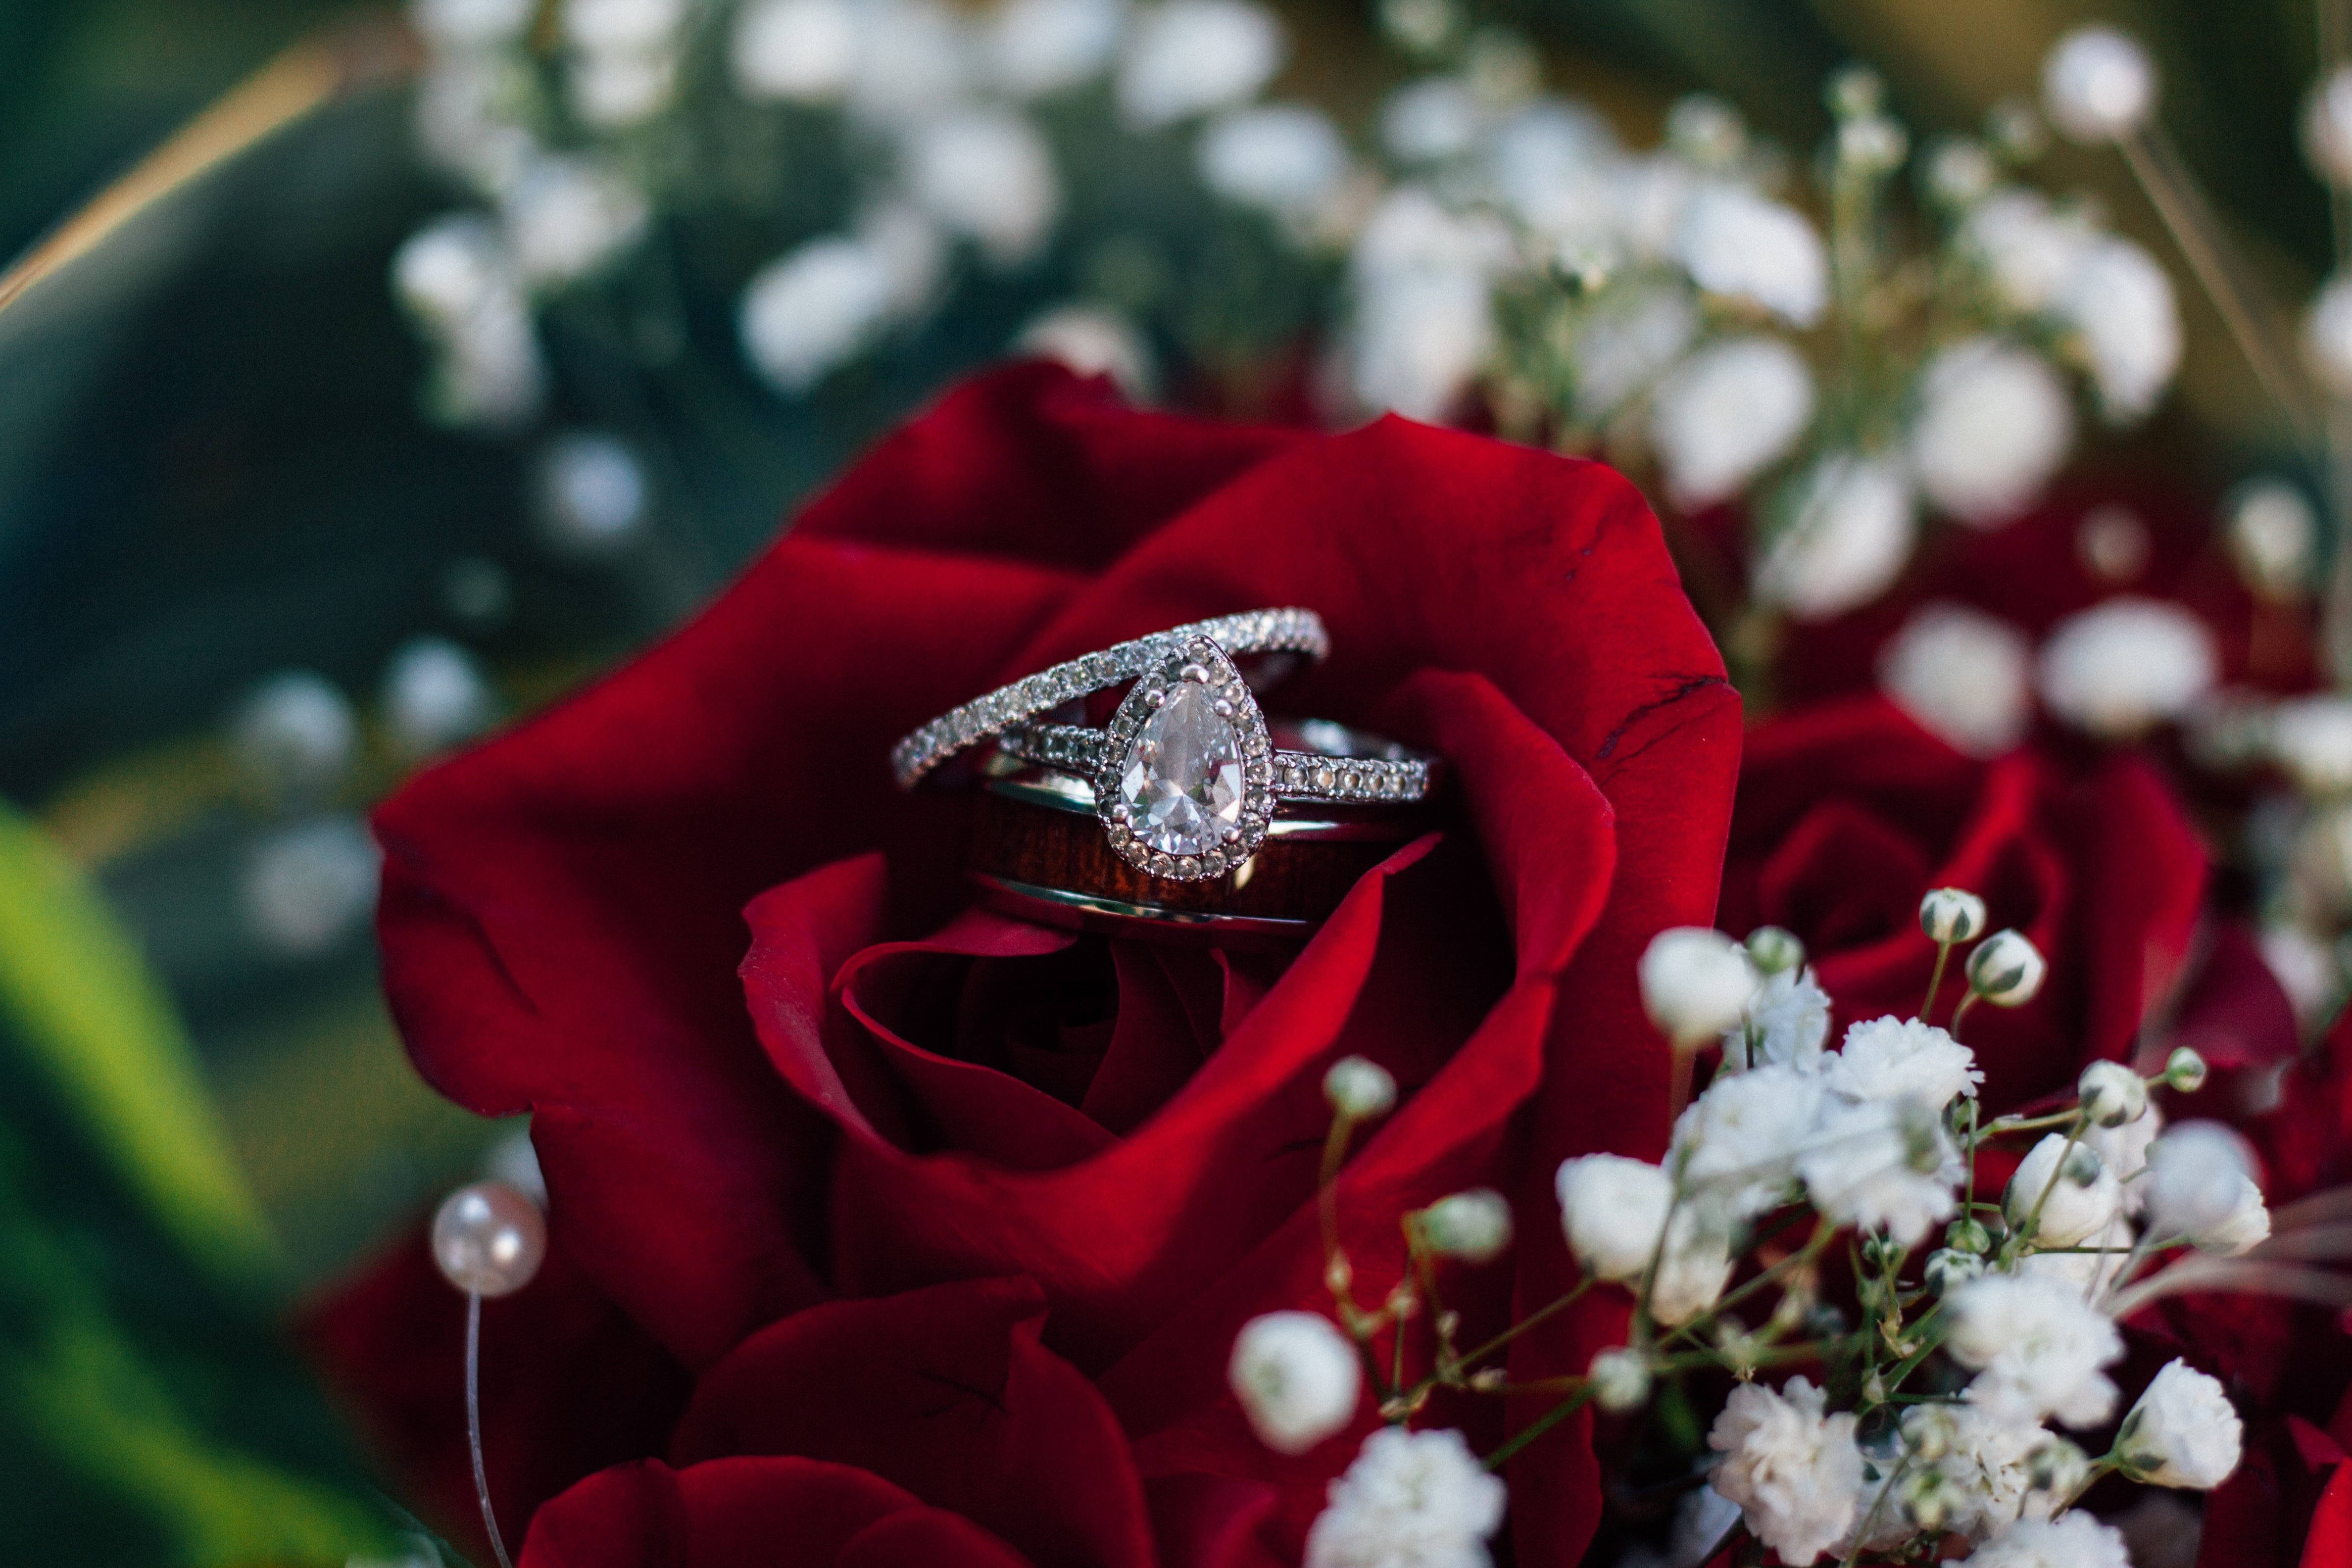 Curtis' proposal was a dream of romance and red roses and Ellie accepted immediately. | Source: Unsplash